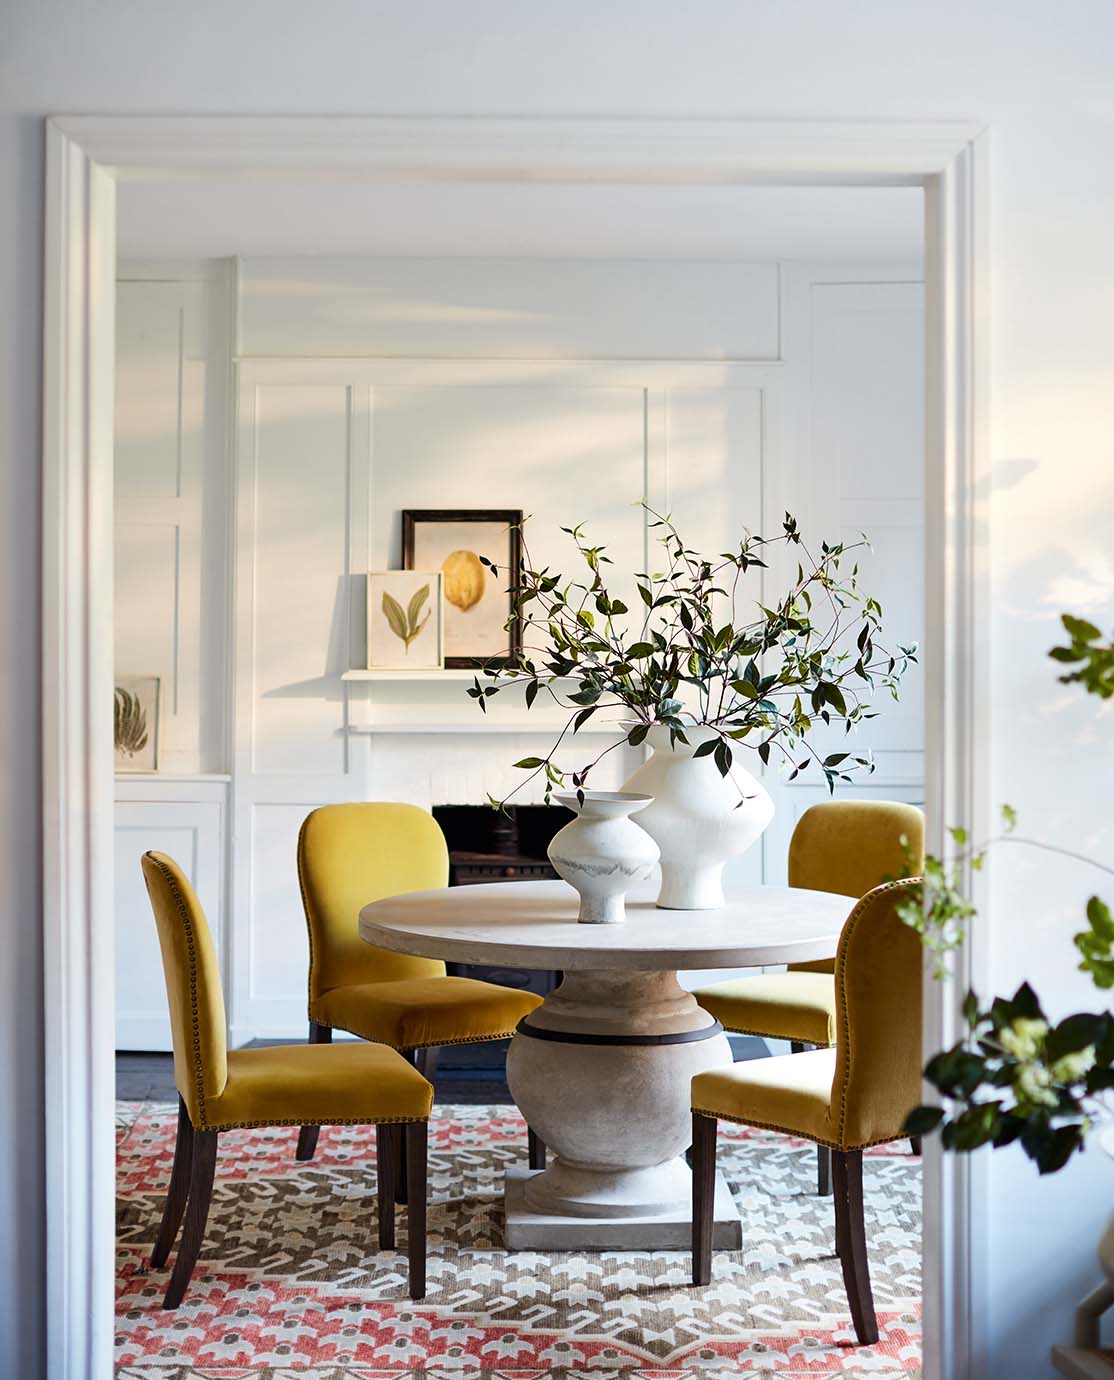 A dining room setting with a round, stone table, four yellow velvet dining chairs and a red patterned rug